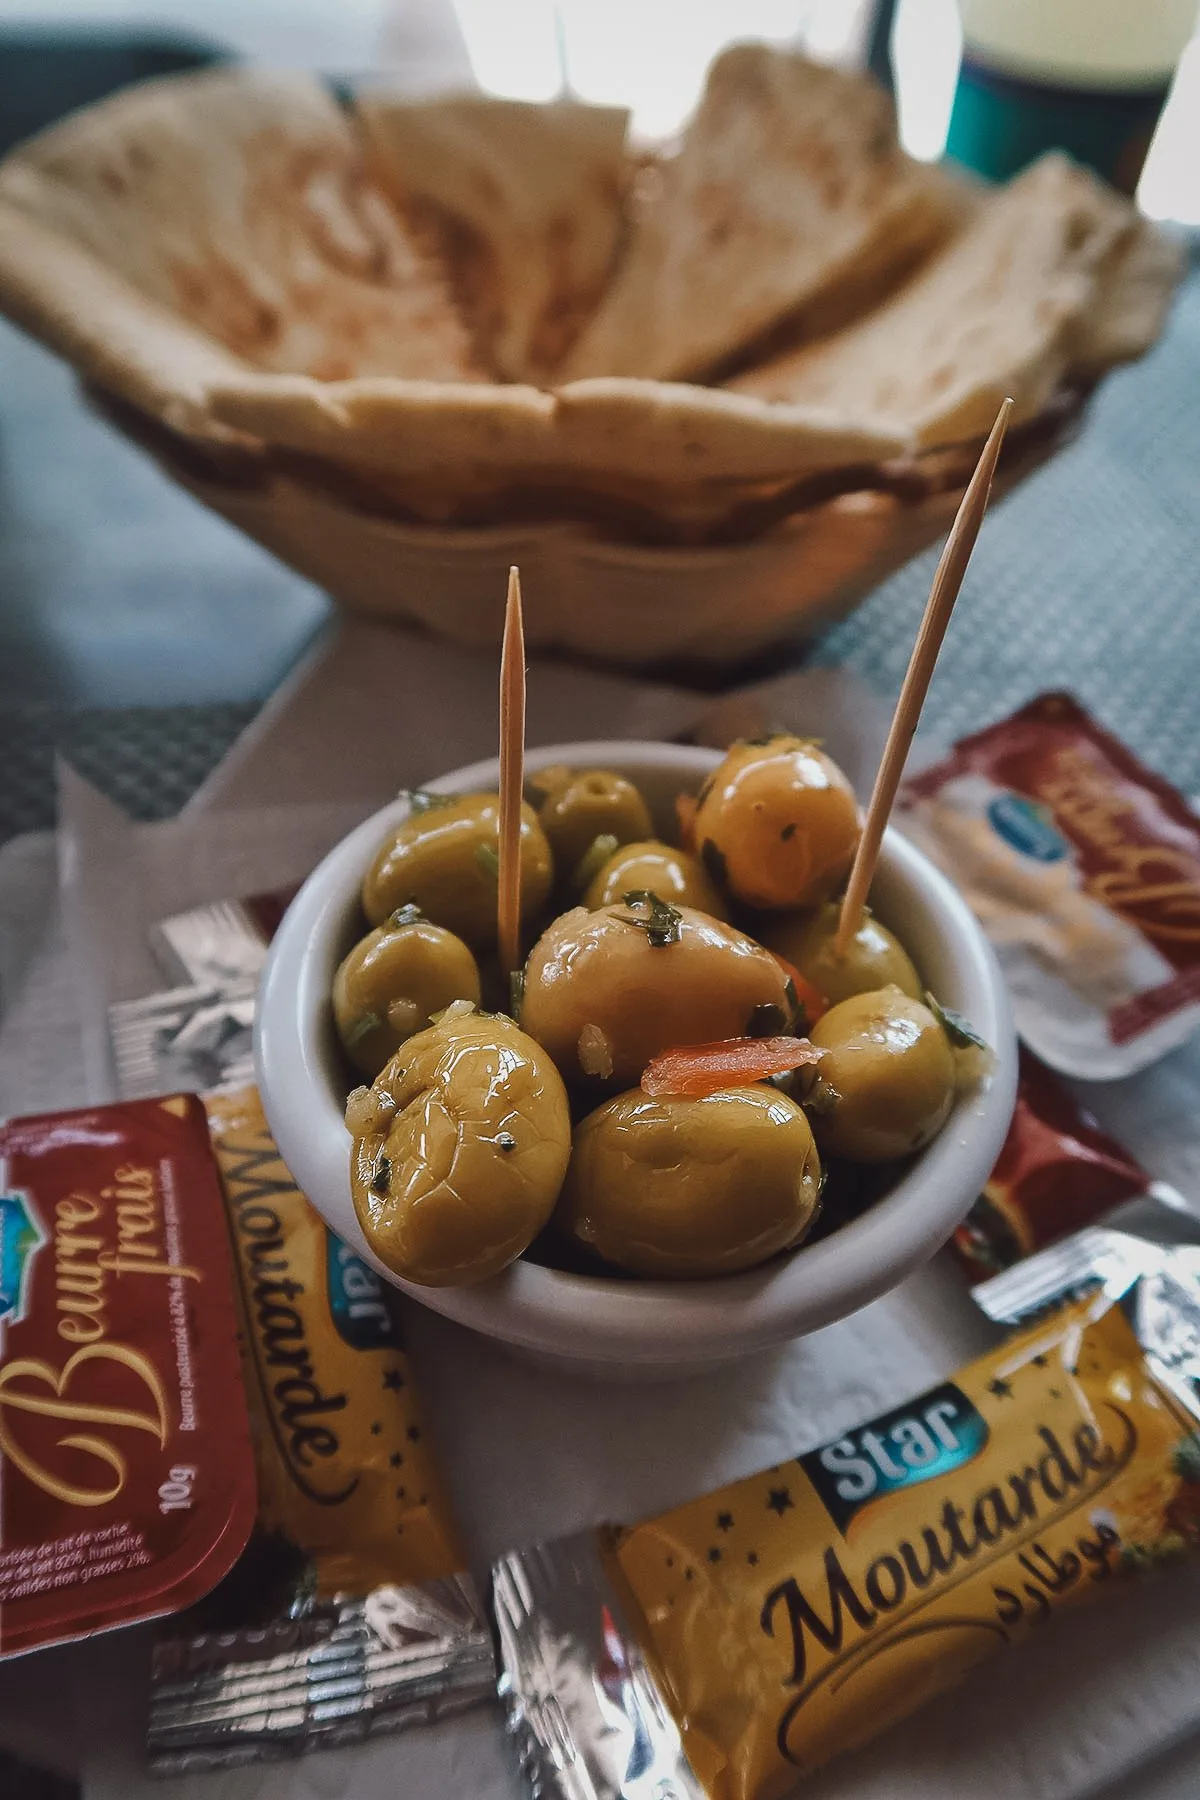 Olives and bread at a restaurant in Marrakech